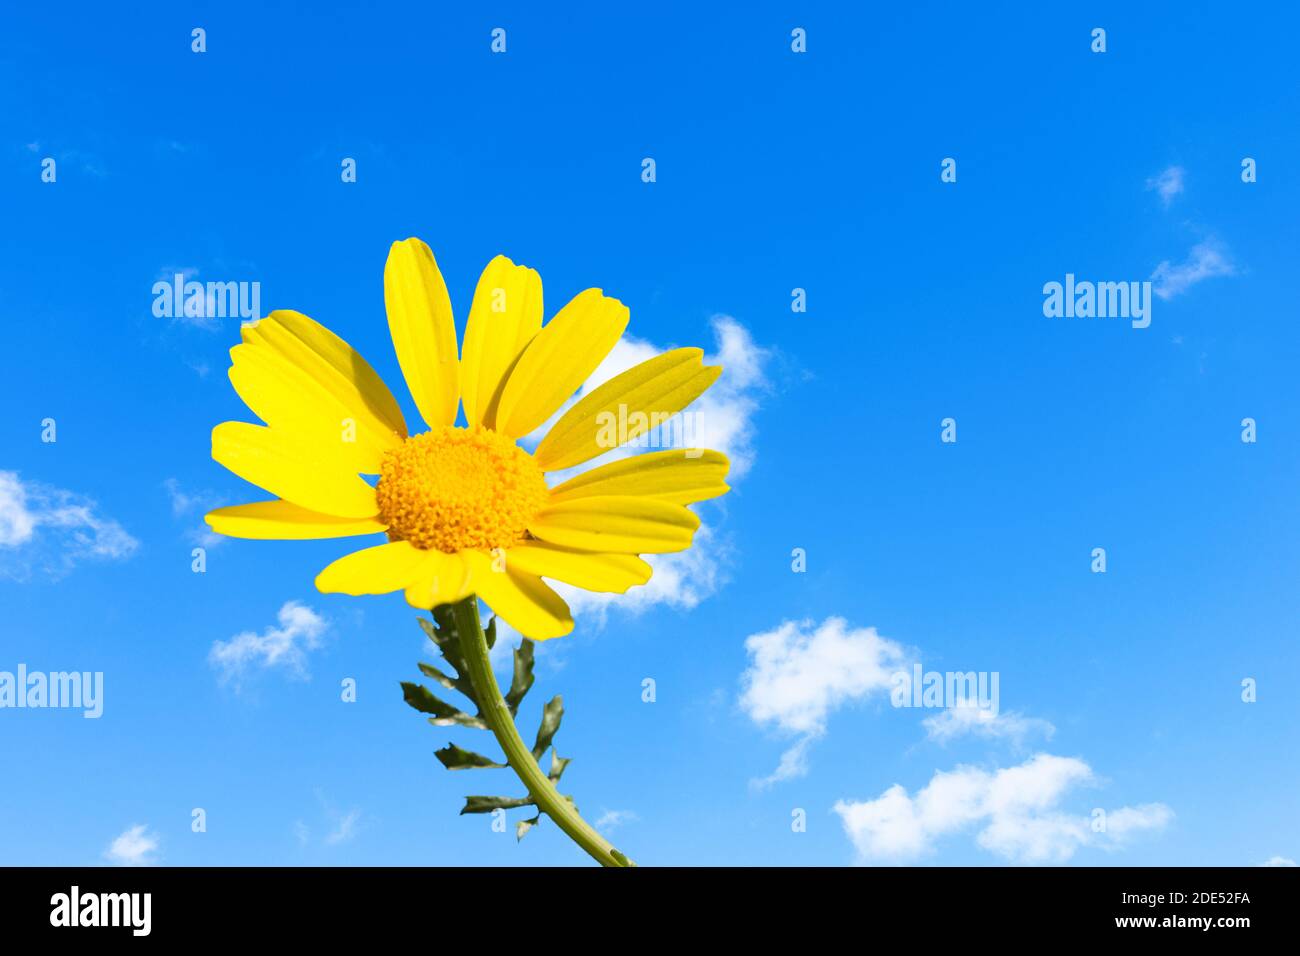 Unique close up yellow marguerita flower blossom isolated in blue sky background. Single yellow daisy in spring blue sky with thin soft white clouds. Stock Photo